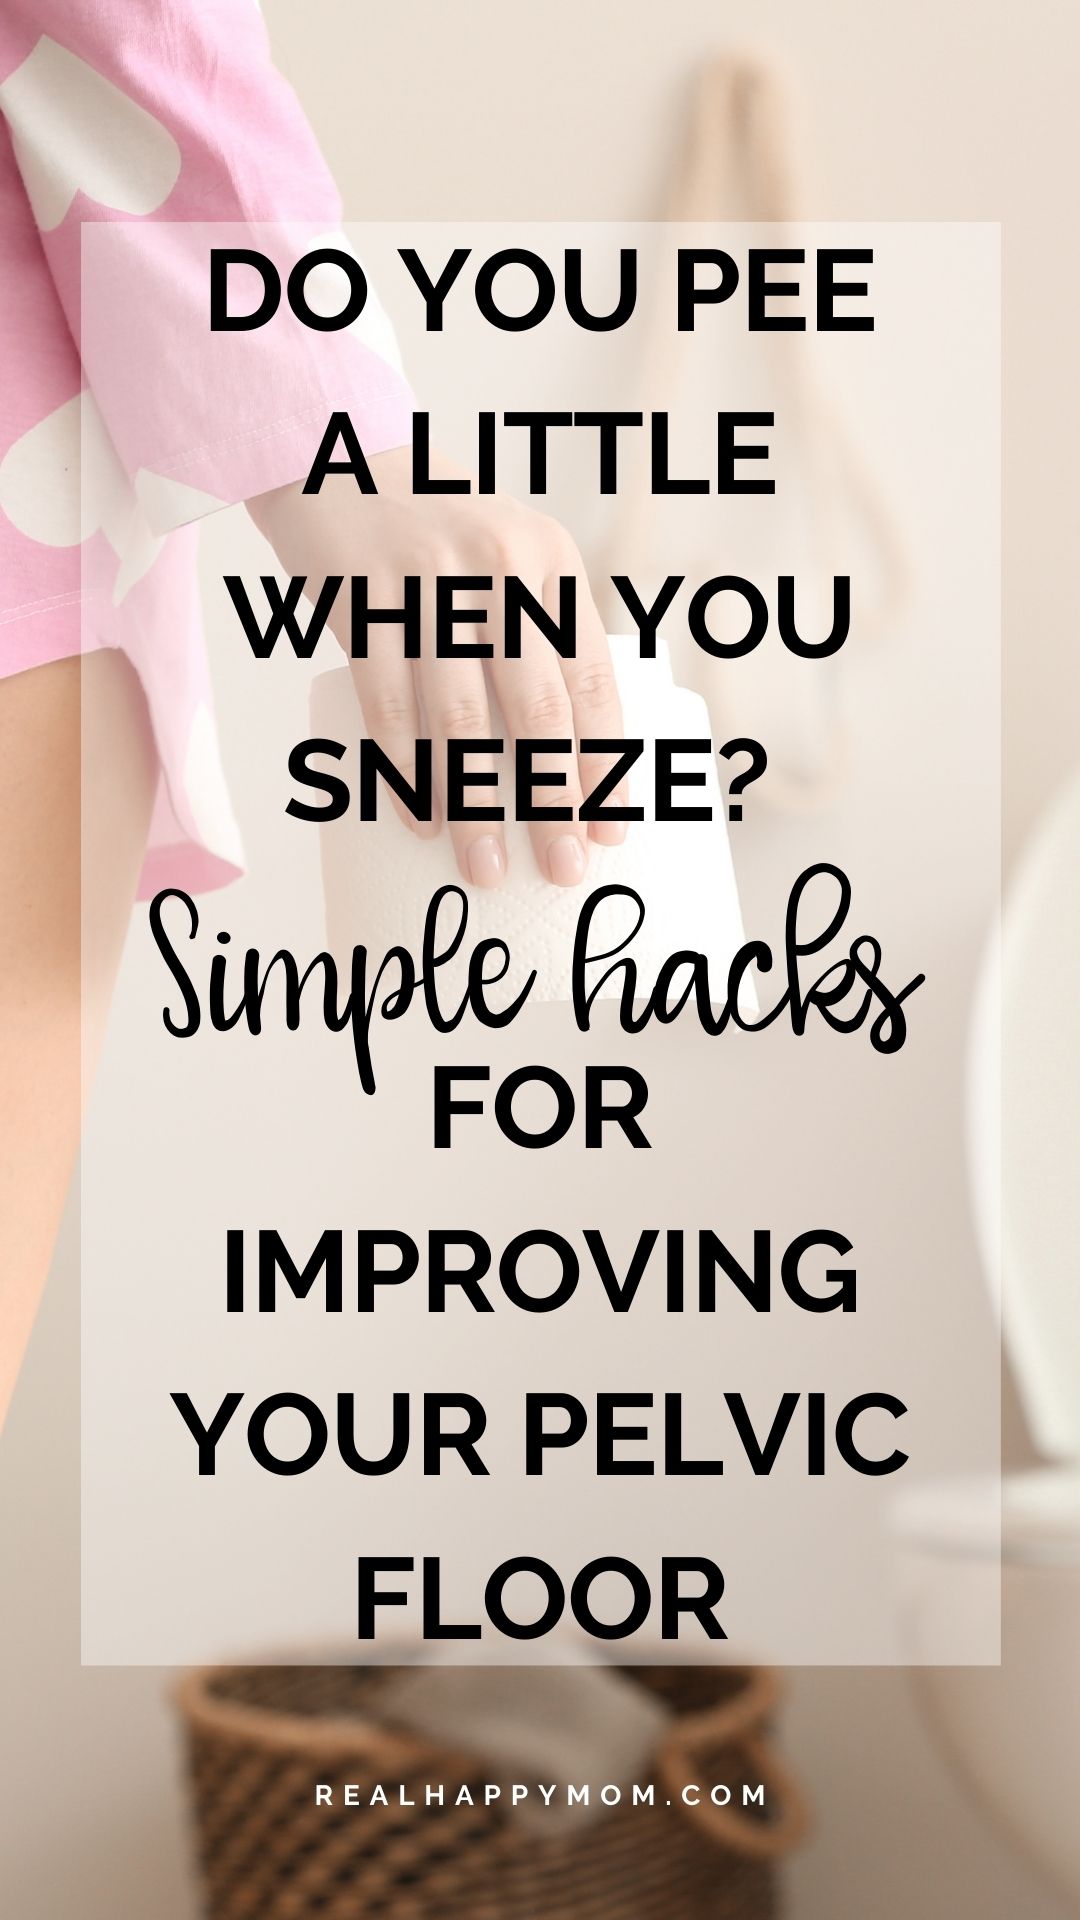 Do You Pee a Little When You Sneeze? Simple Hacks for Improving Your Pelvic Floor